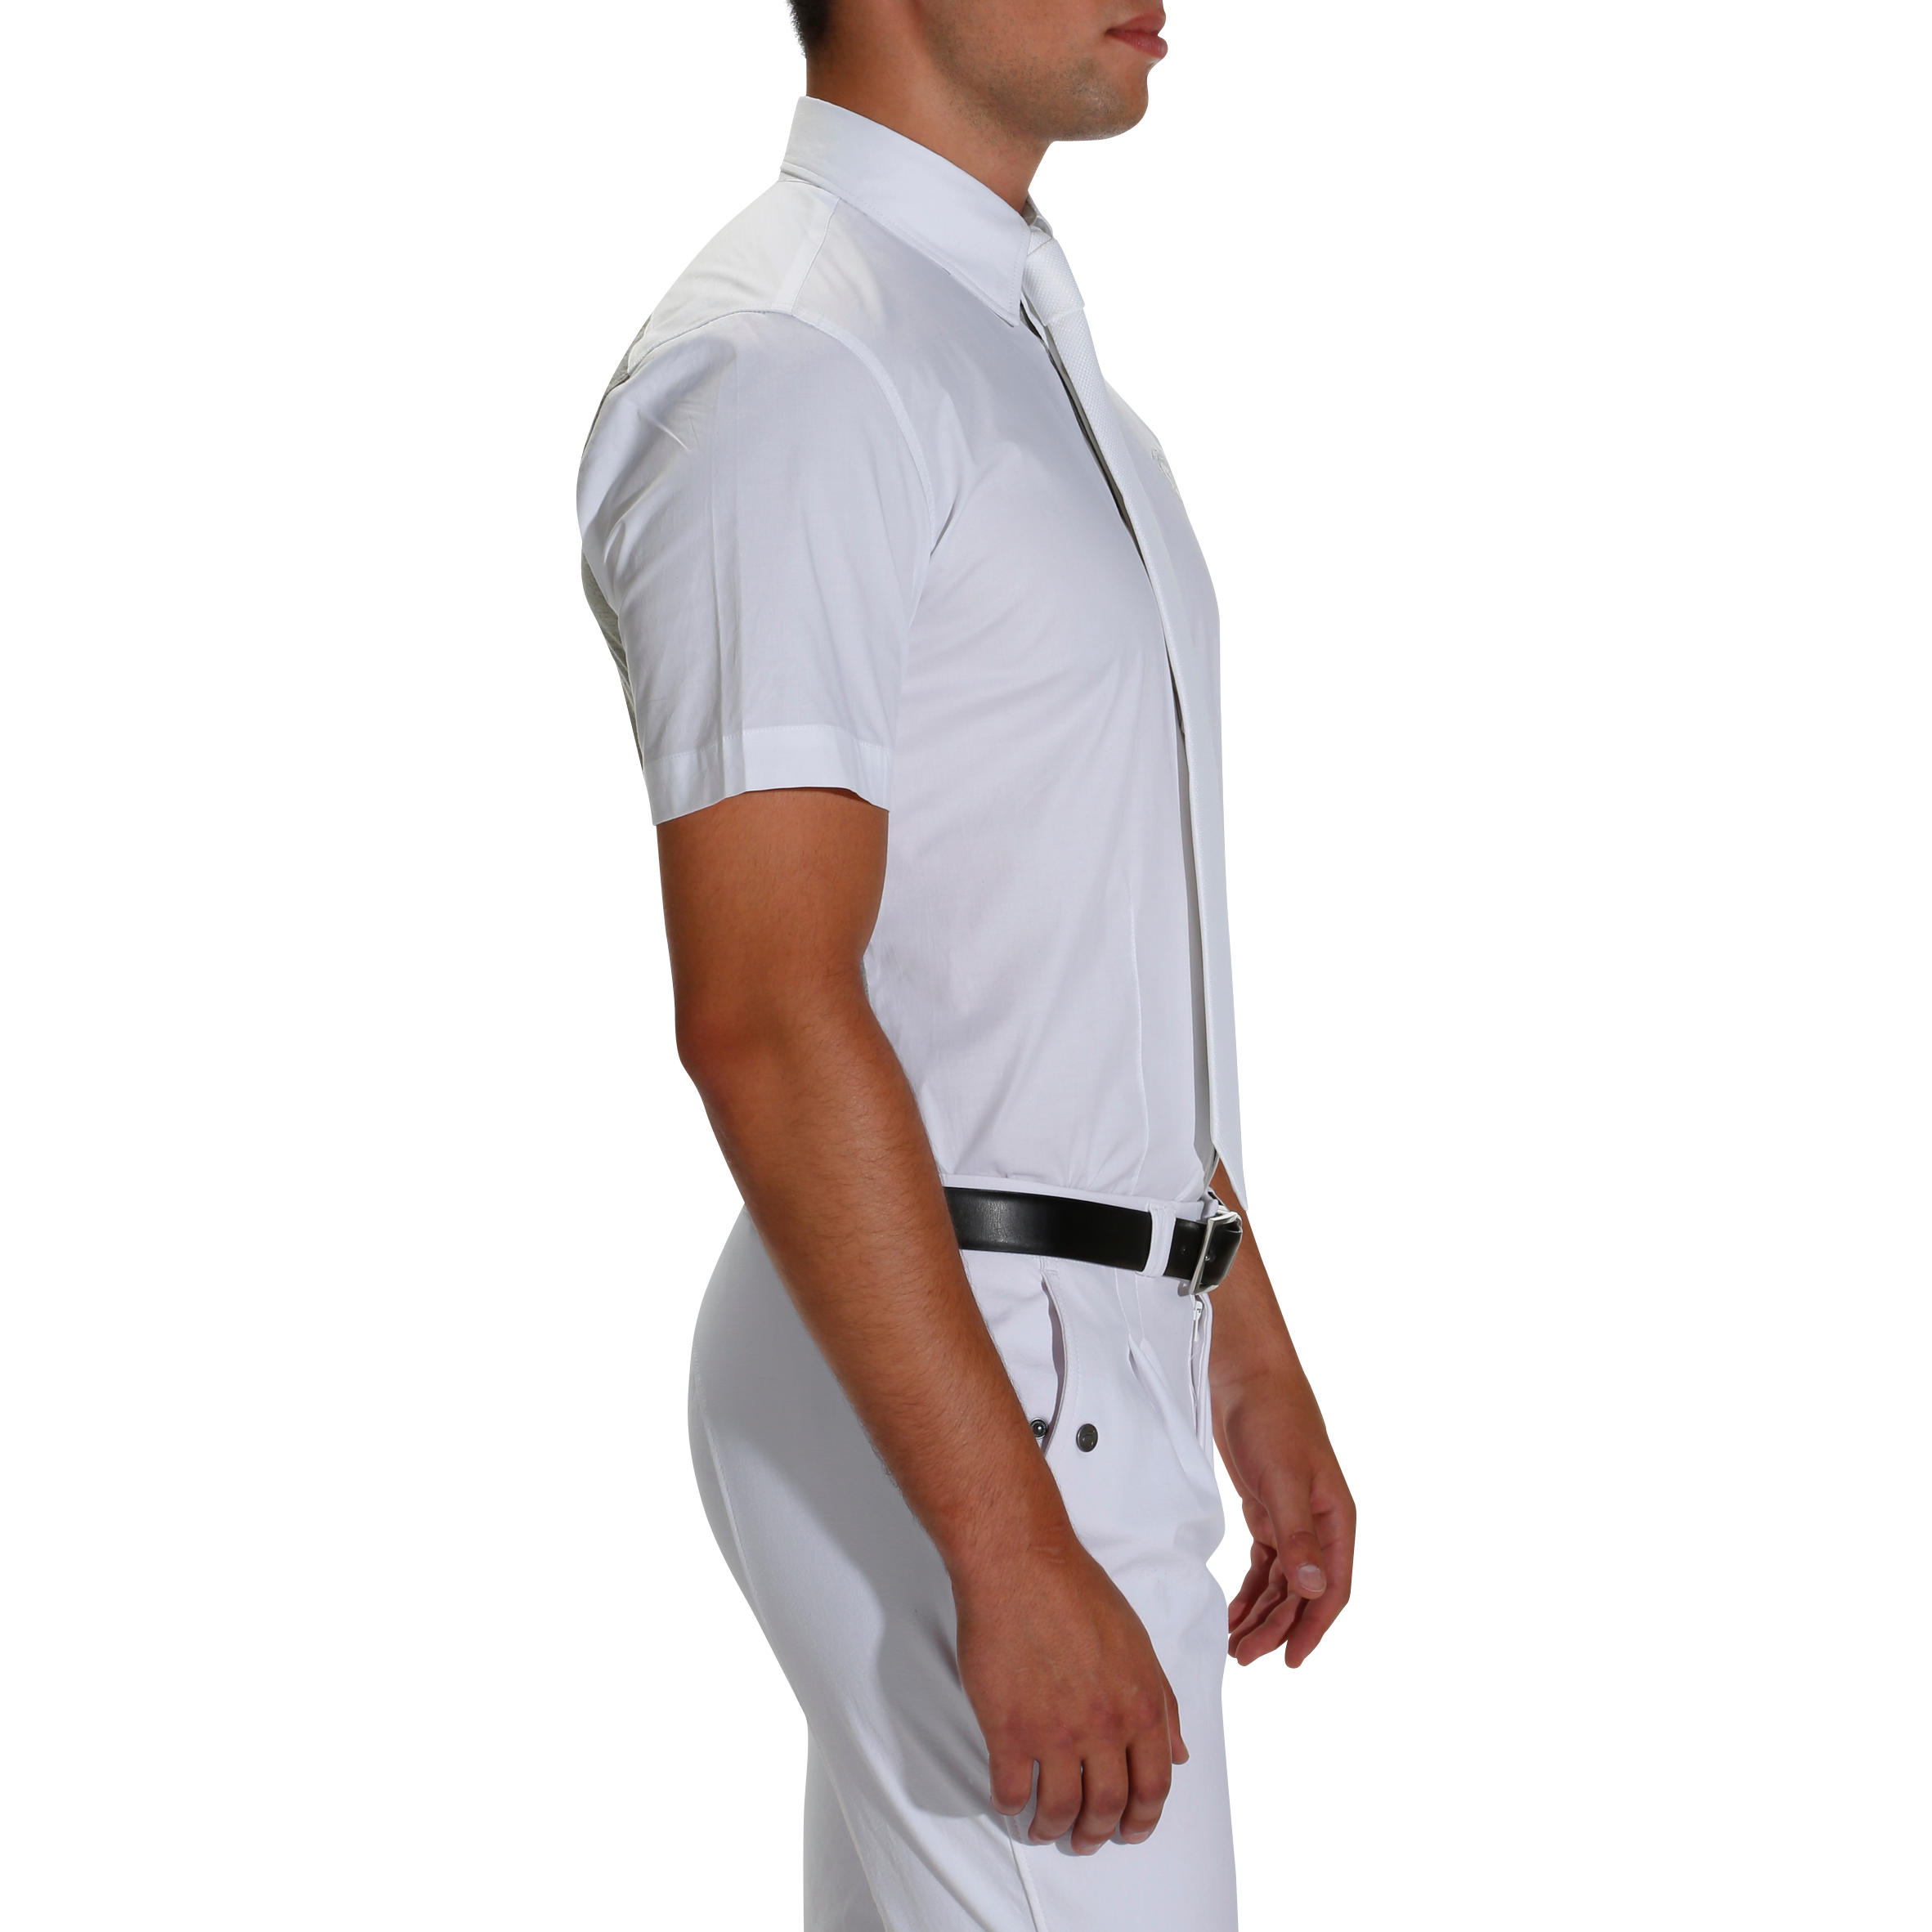 Horse Riding Short-Sleeved Dual-Material Competition Shirt - White/Grey 3/11